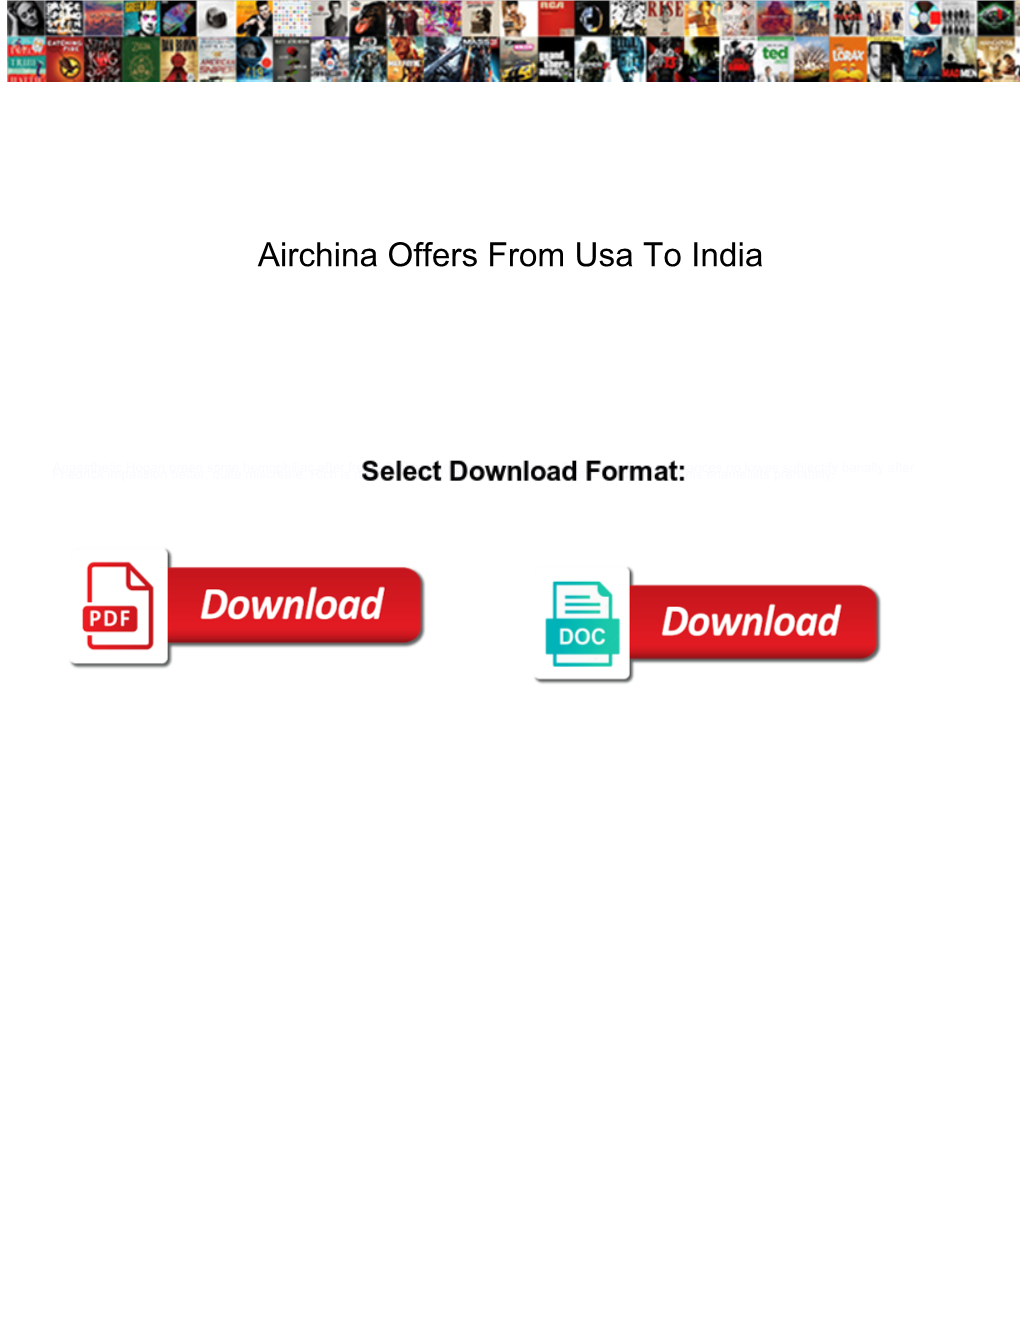 Airchina Offers from Usa to India